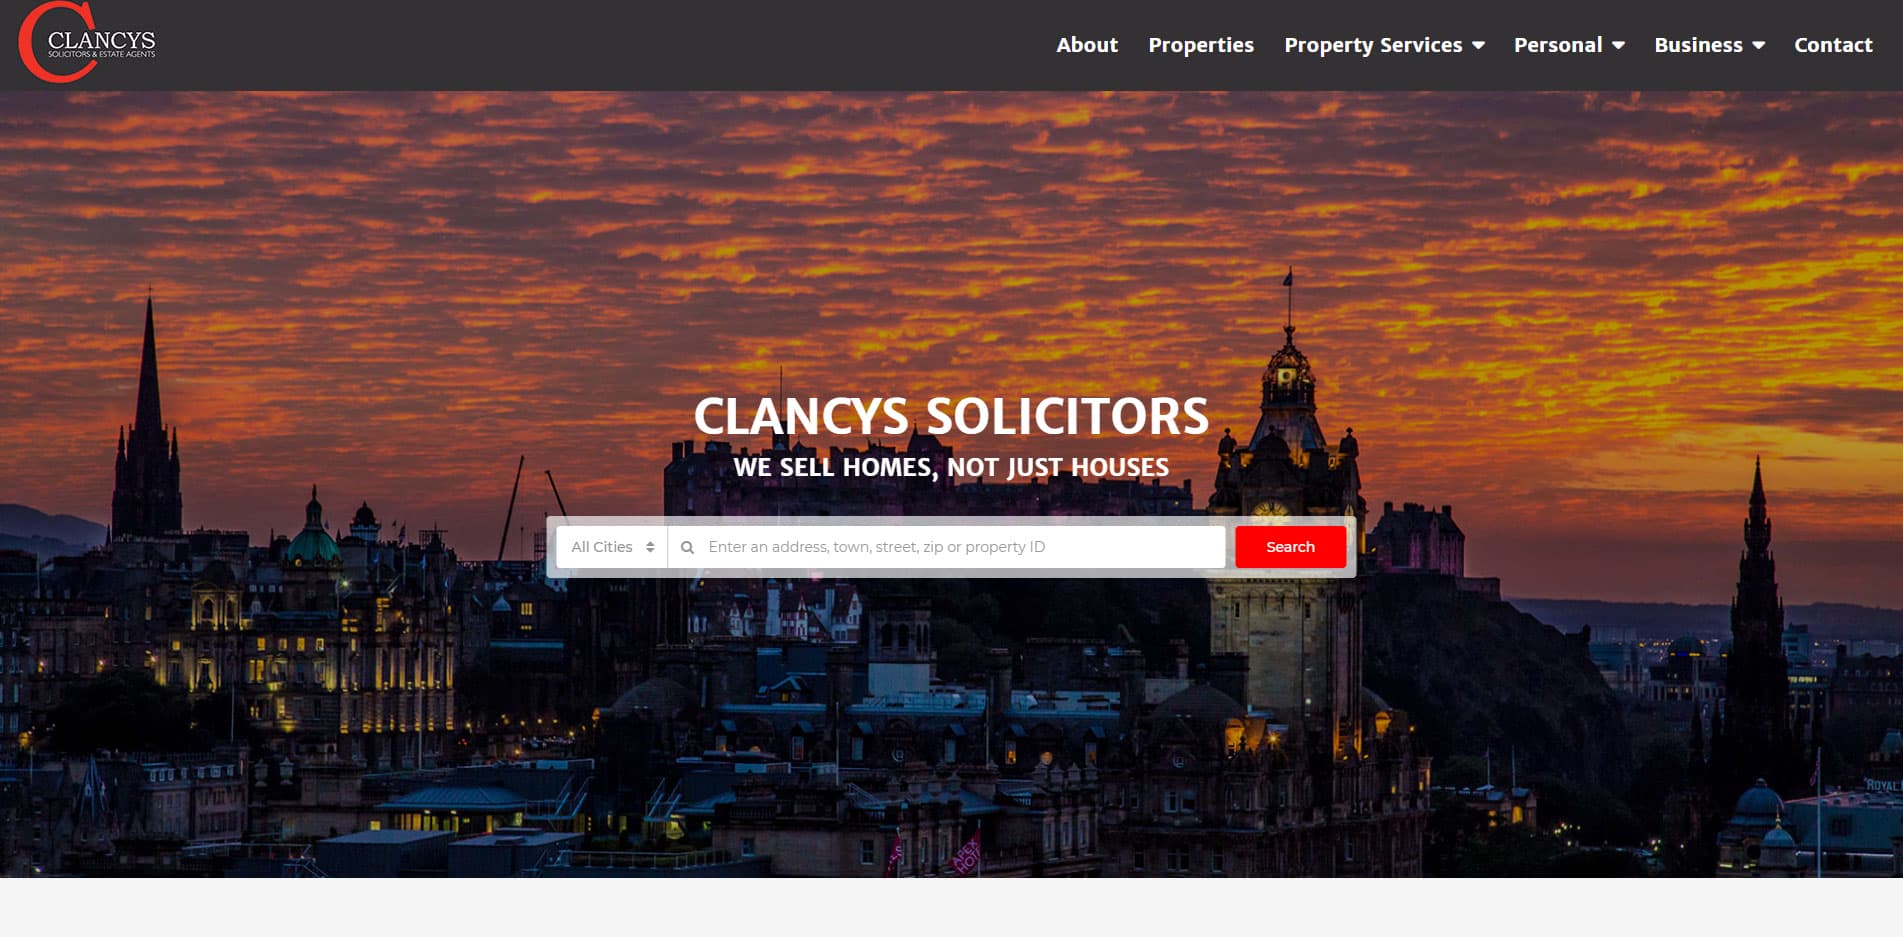 Clancys Solicitors Homepage 2018